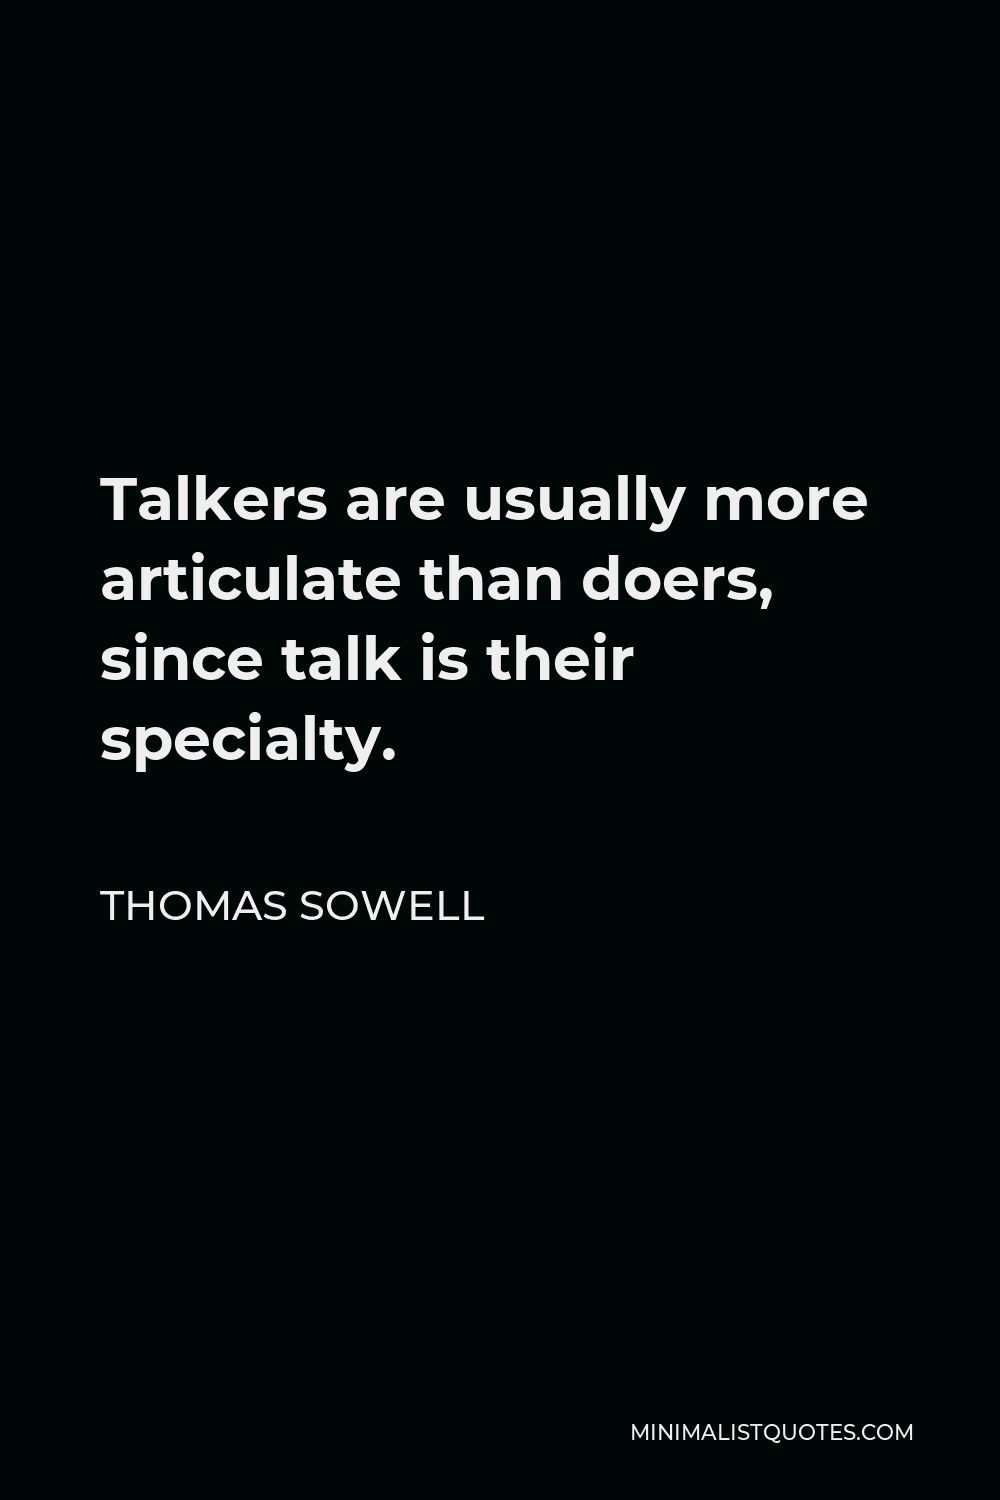 Thomas Sowell Quote - Talkers are usually more articulate than doers, since talk is their specialty.